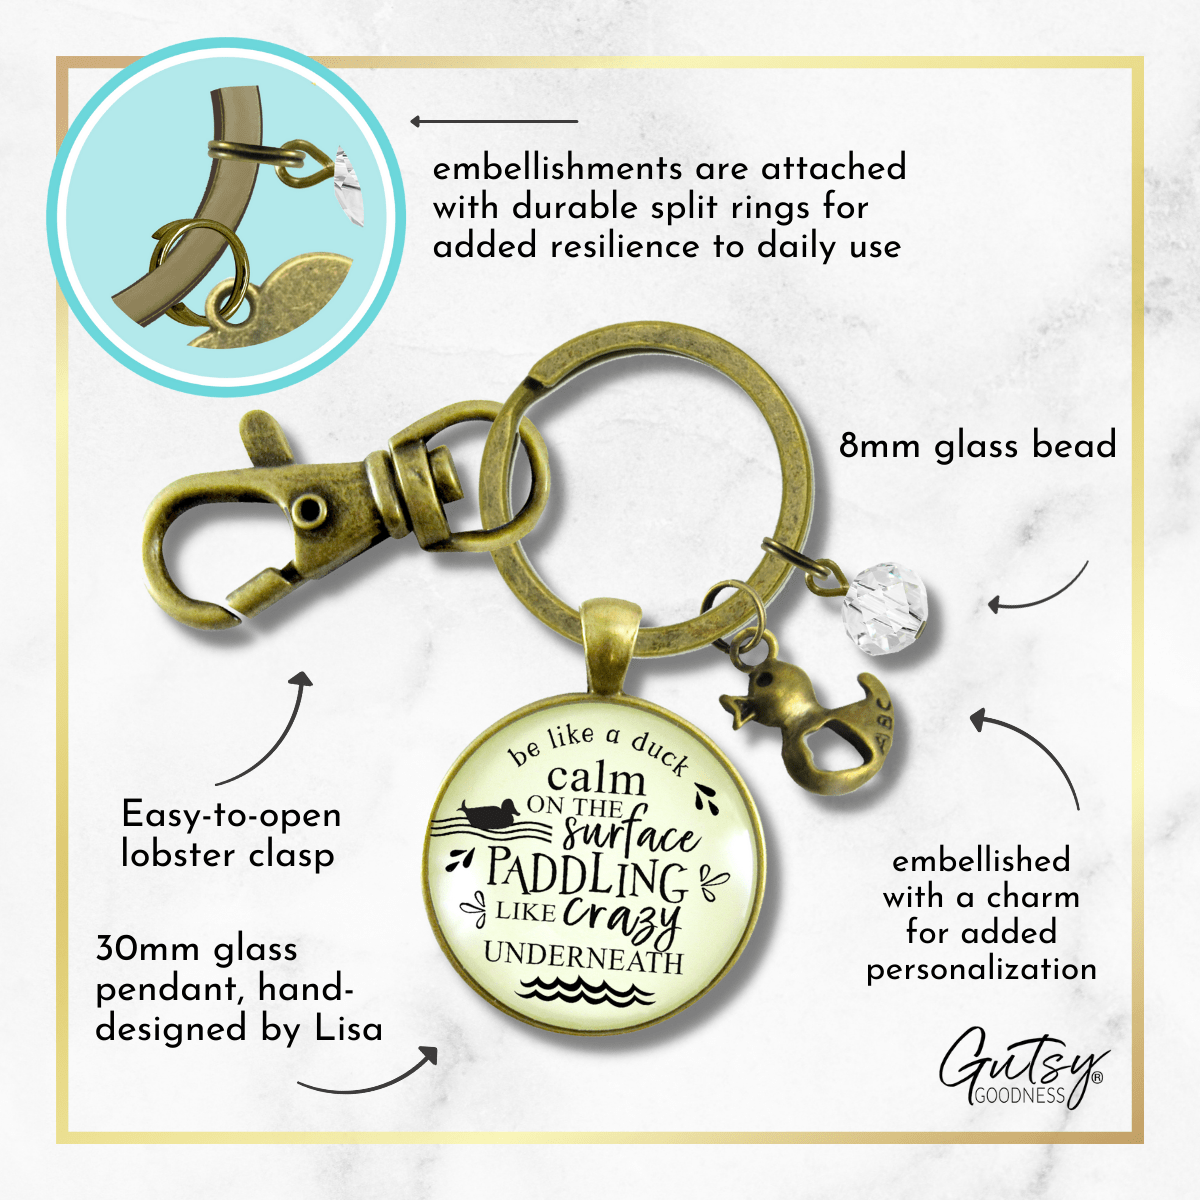 Inspirational Keychain Be Like A Duck Calm Paddling Funny Hustle Mantra Quote Jewelry Gift - Gutsy Goodness Handmade Jewelry;Inspirational Keychain Be Like A Duck Calm Paddling Funny Hustle Mantra Quote Jewelry Gift - Gutsy Goodness Handmade Jewelry Gifts